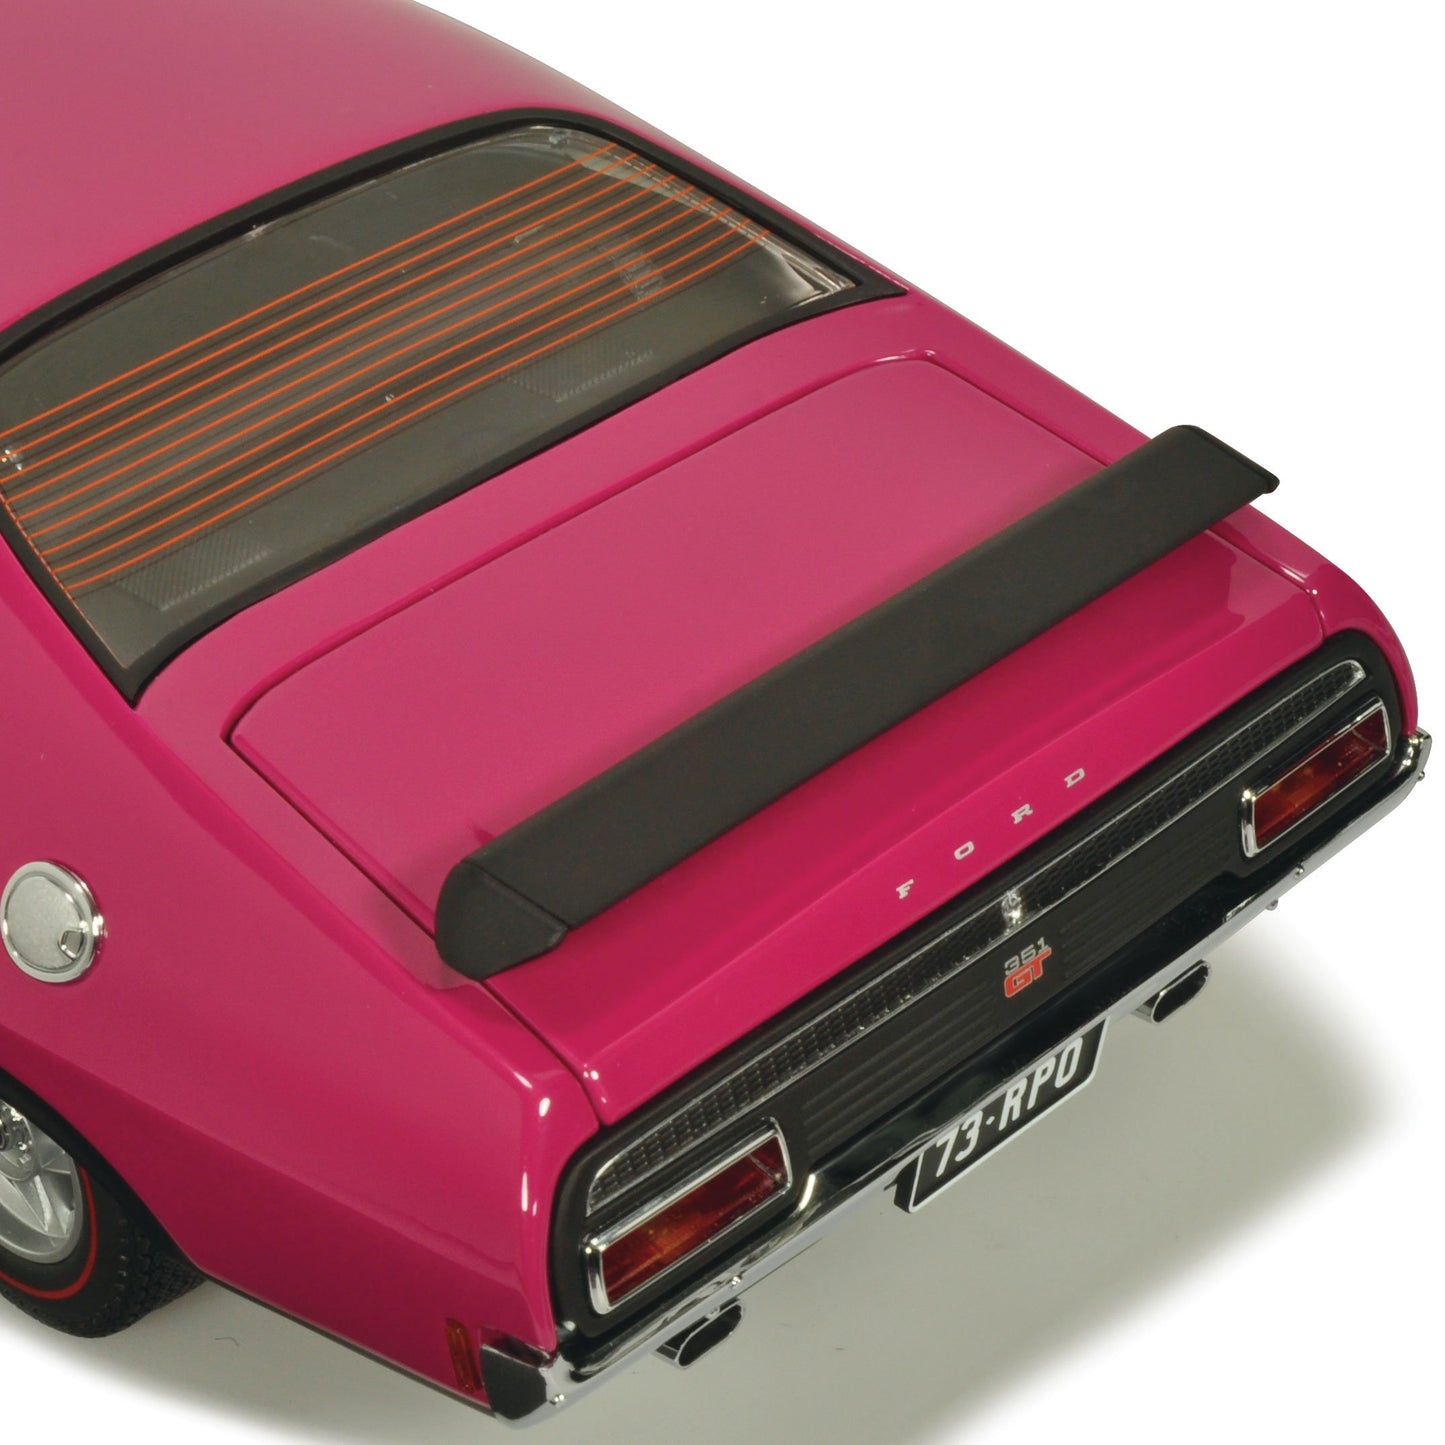 Classic Carlectables 43-18798: Ford XA Falcon RPO83 Coupe Wild Plum